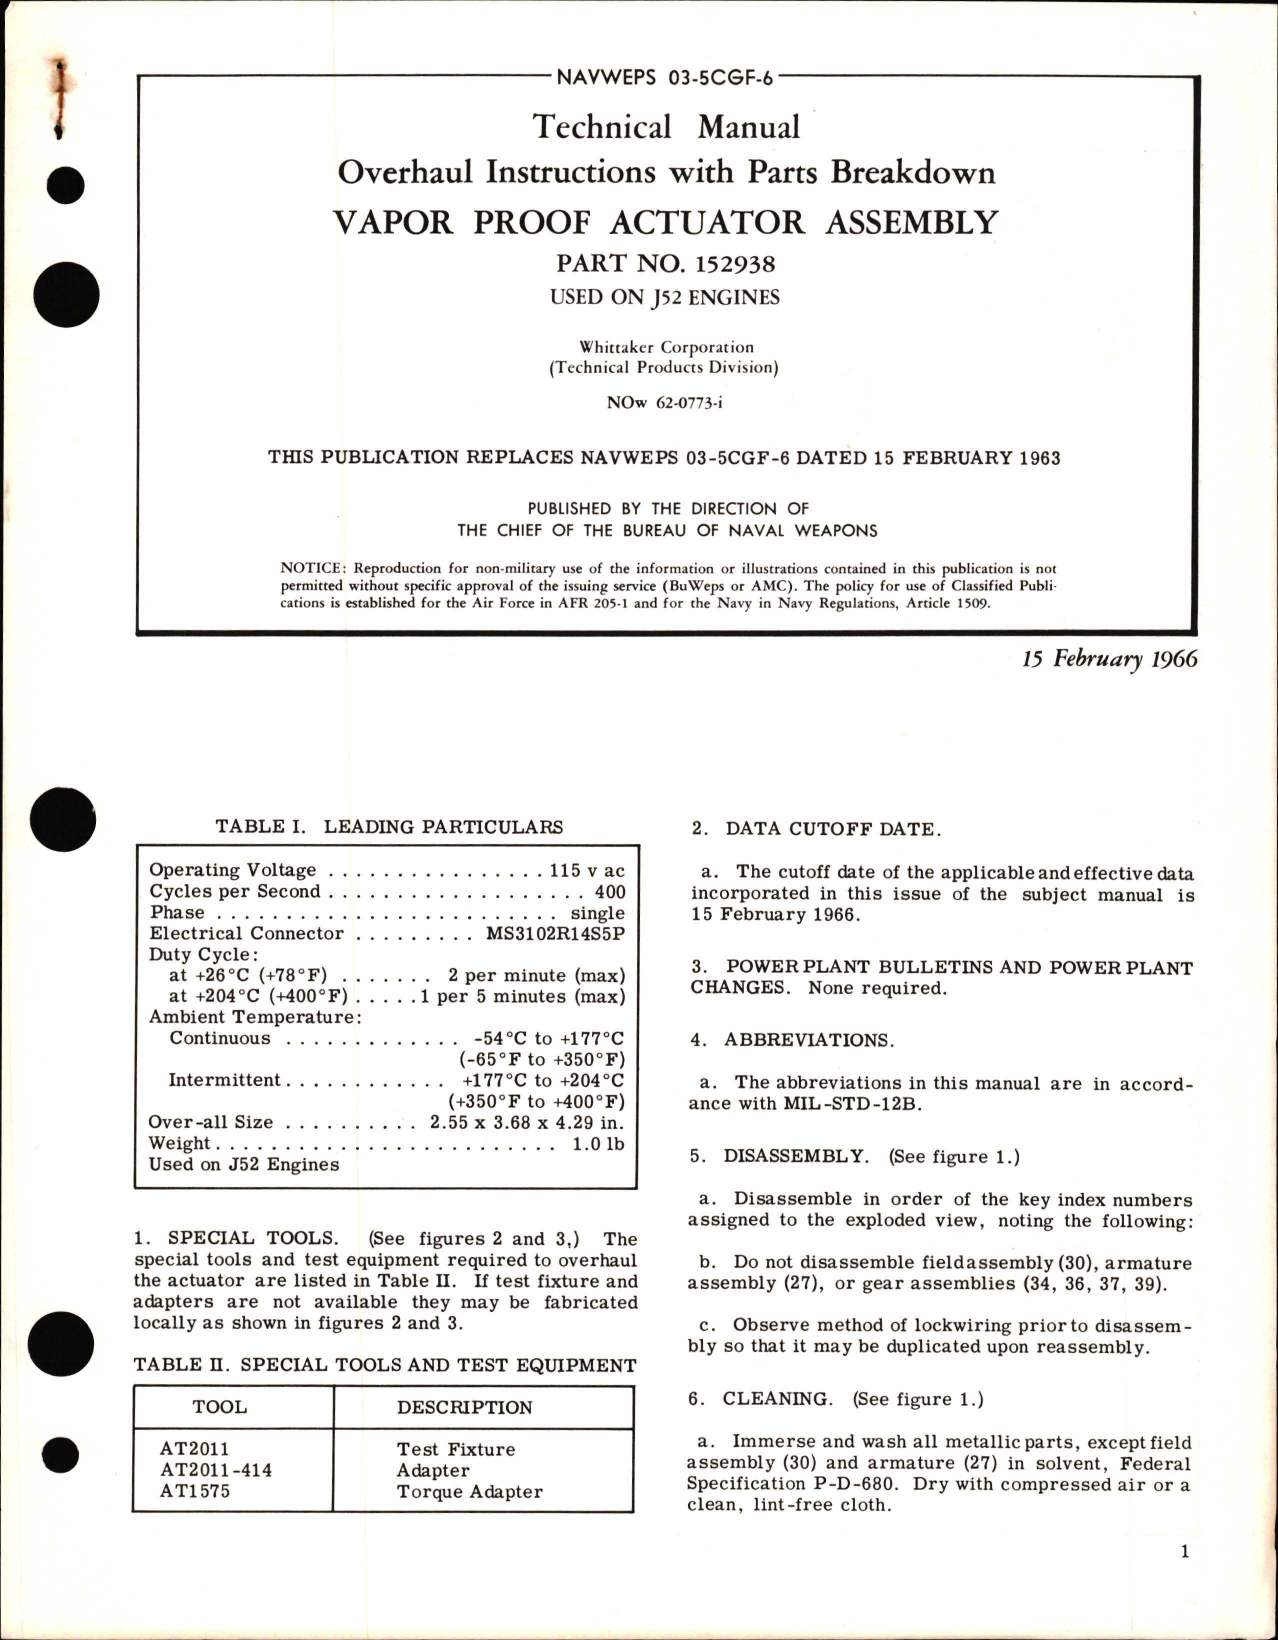 Sample page 1 from AirCorps Library document: Overhaul Instructions with Parts Breakdown for Vapor Proof Actuator Assembly - Part 152938 